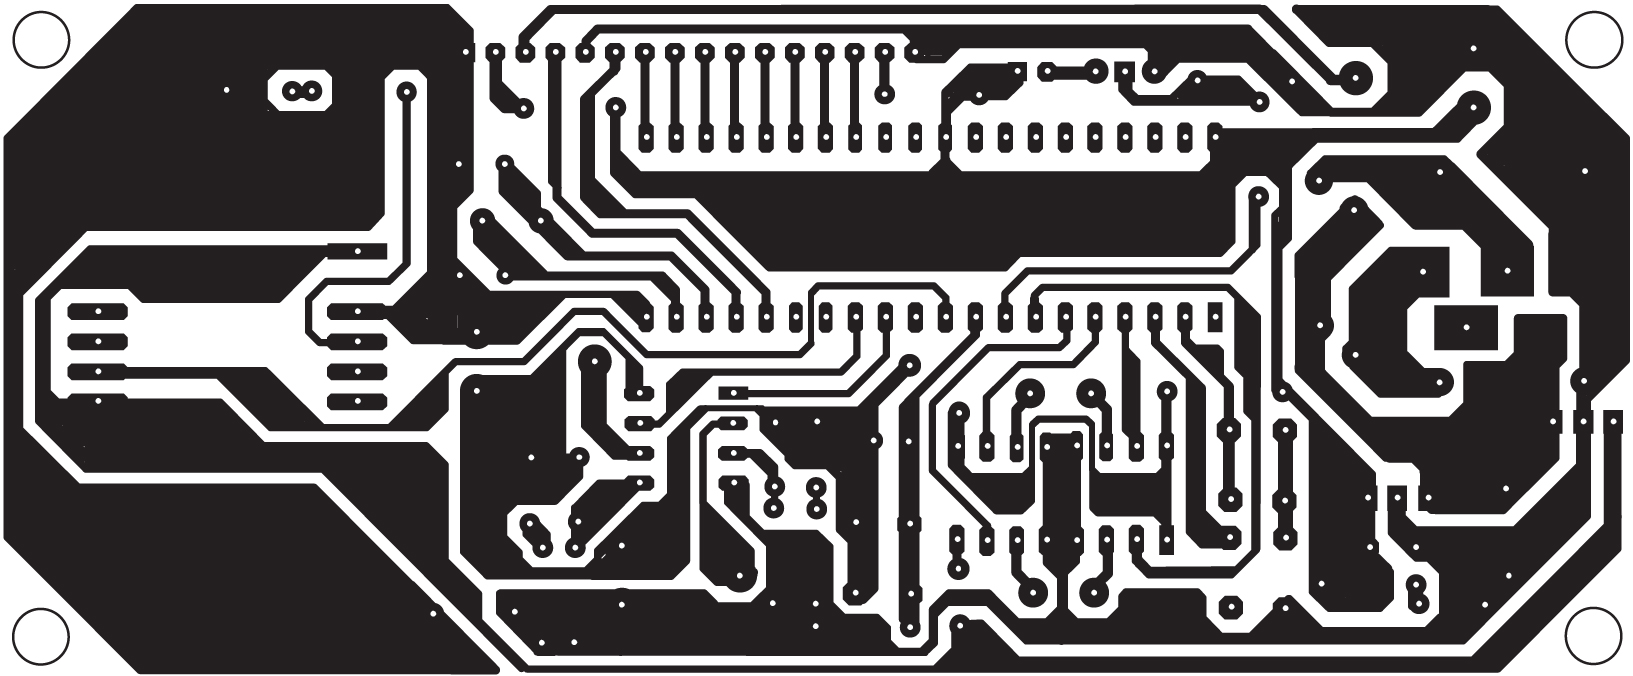 Fig. 7: An actual-size, single-side PCB for the RFID-based automatic vehicle parking system